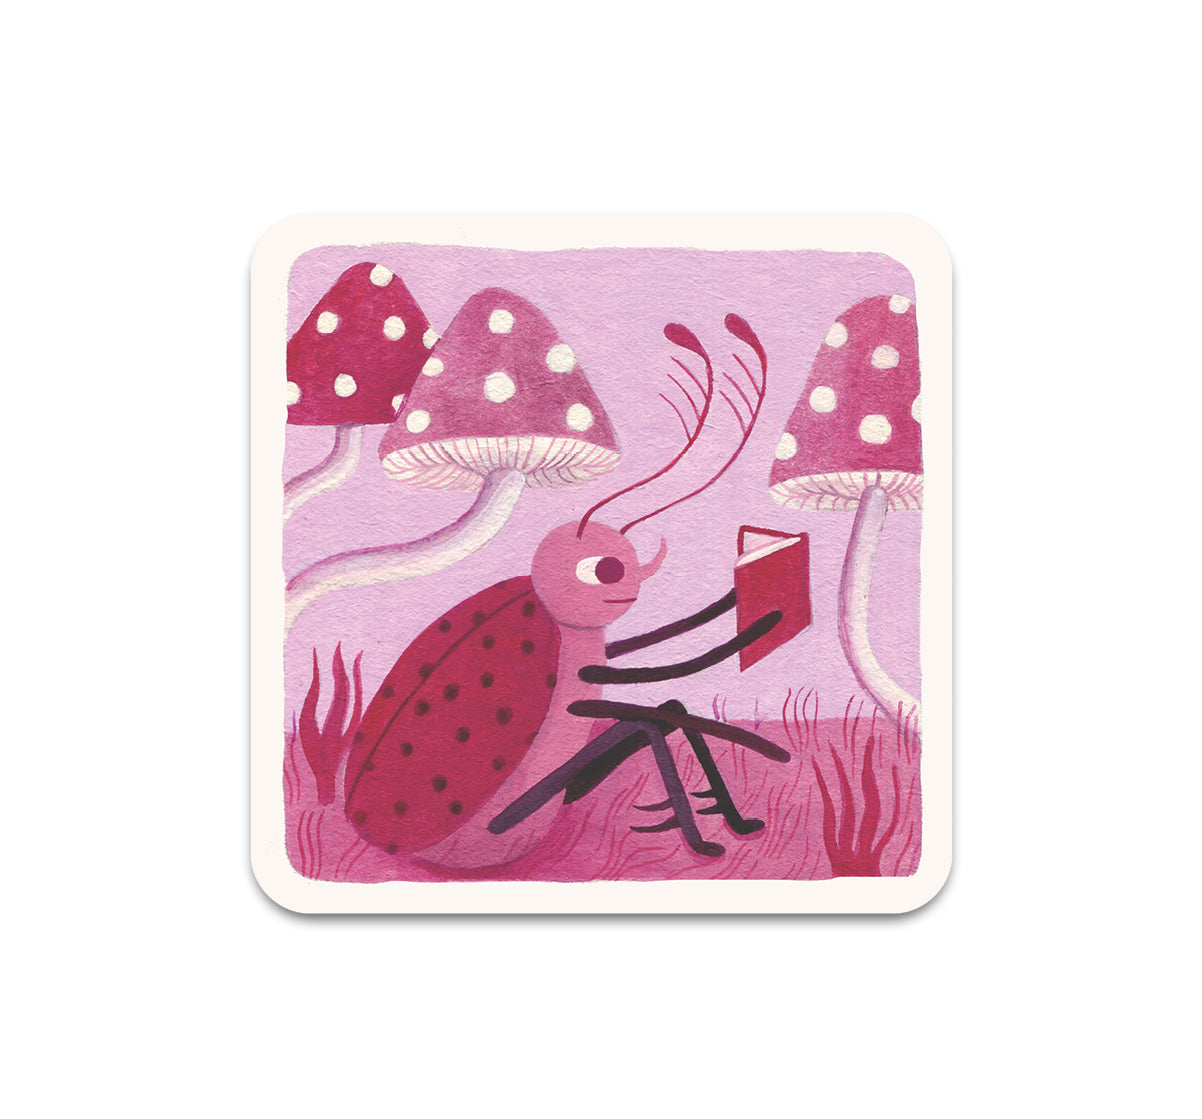 S9 Alexandria Marie Compo (Beetle in the Hay)  - Coaster 1